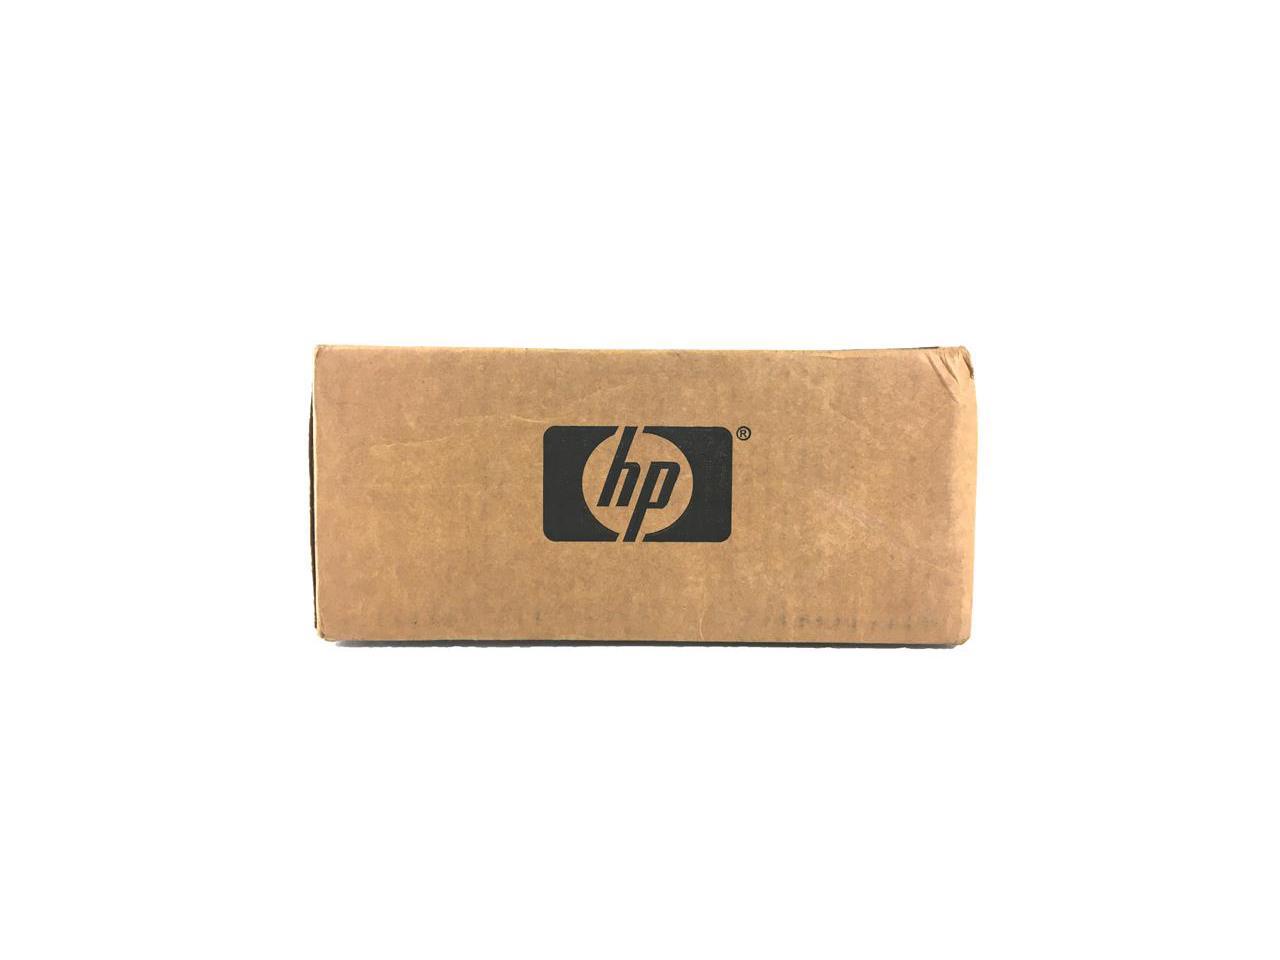 HP Q6Q68A Storeever Msl 30750 Drive Upgrade Kit - Tape Library Drive Module - Lto Ultrium (12 Tb / 30 Tb) - Ultrium 8 - Sas-2 - Internal - 5.25 Inch - Encryption - For Storeever Msl6480 Scalable Base